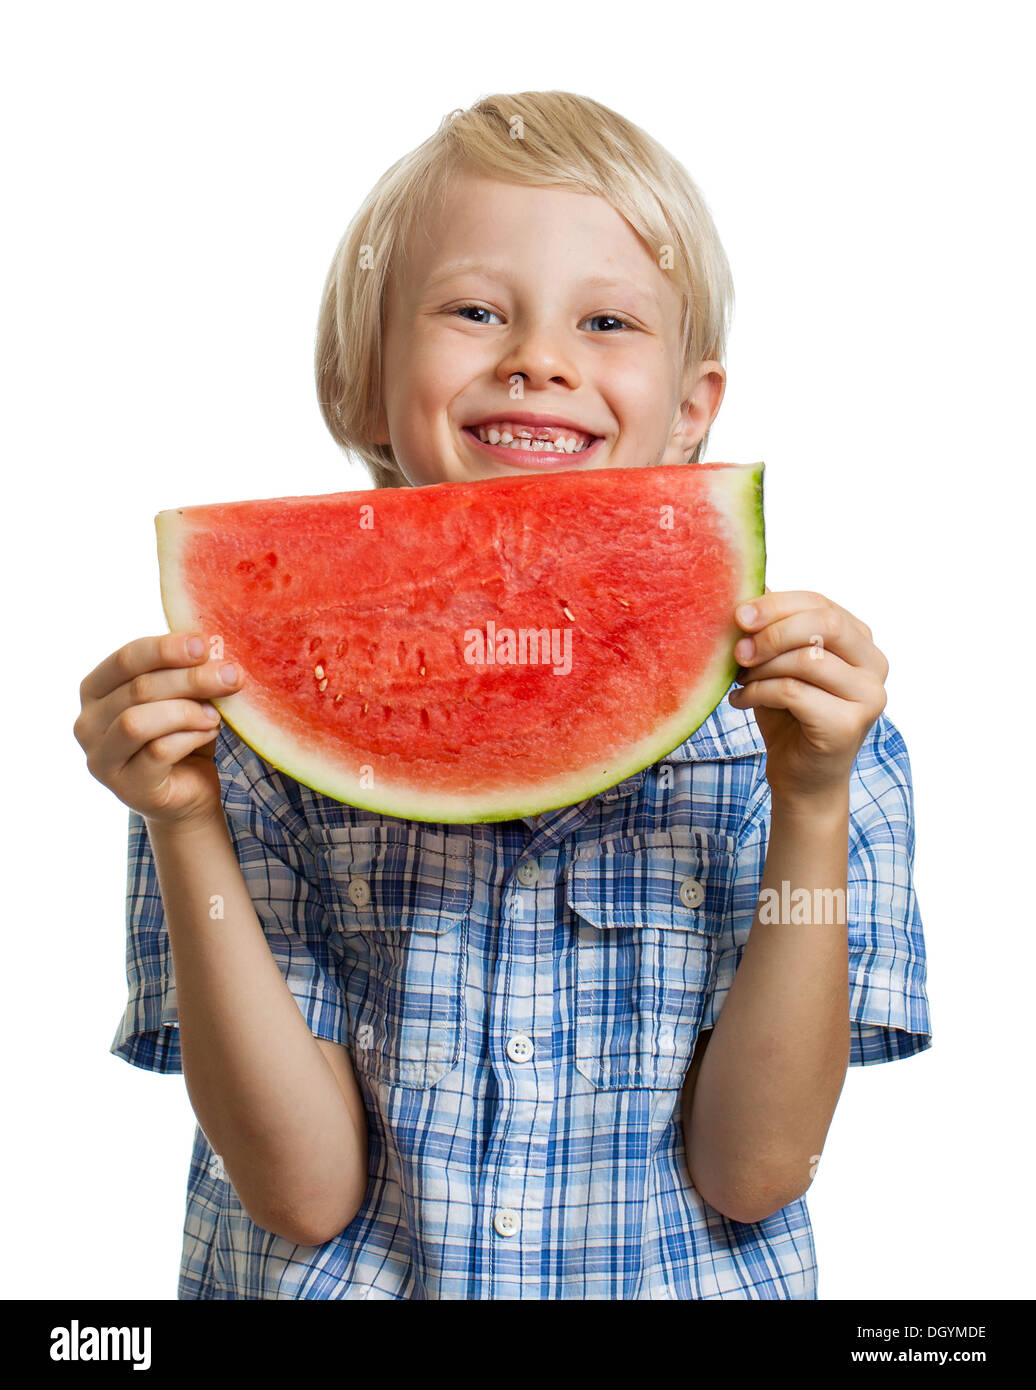 A laughing cute boy holding a juicy slice of watermelon. Isolated on white. Stock Photo